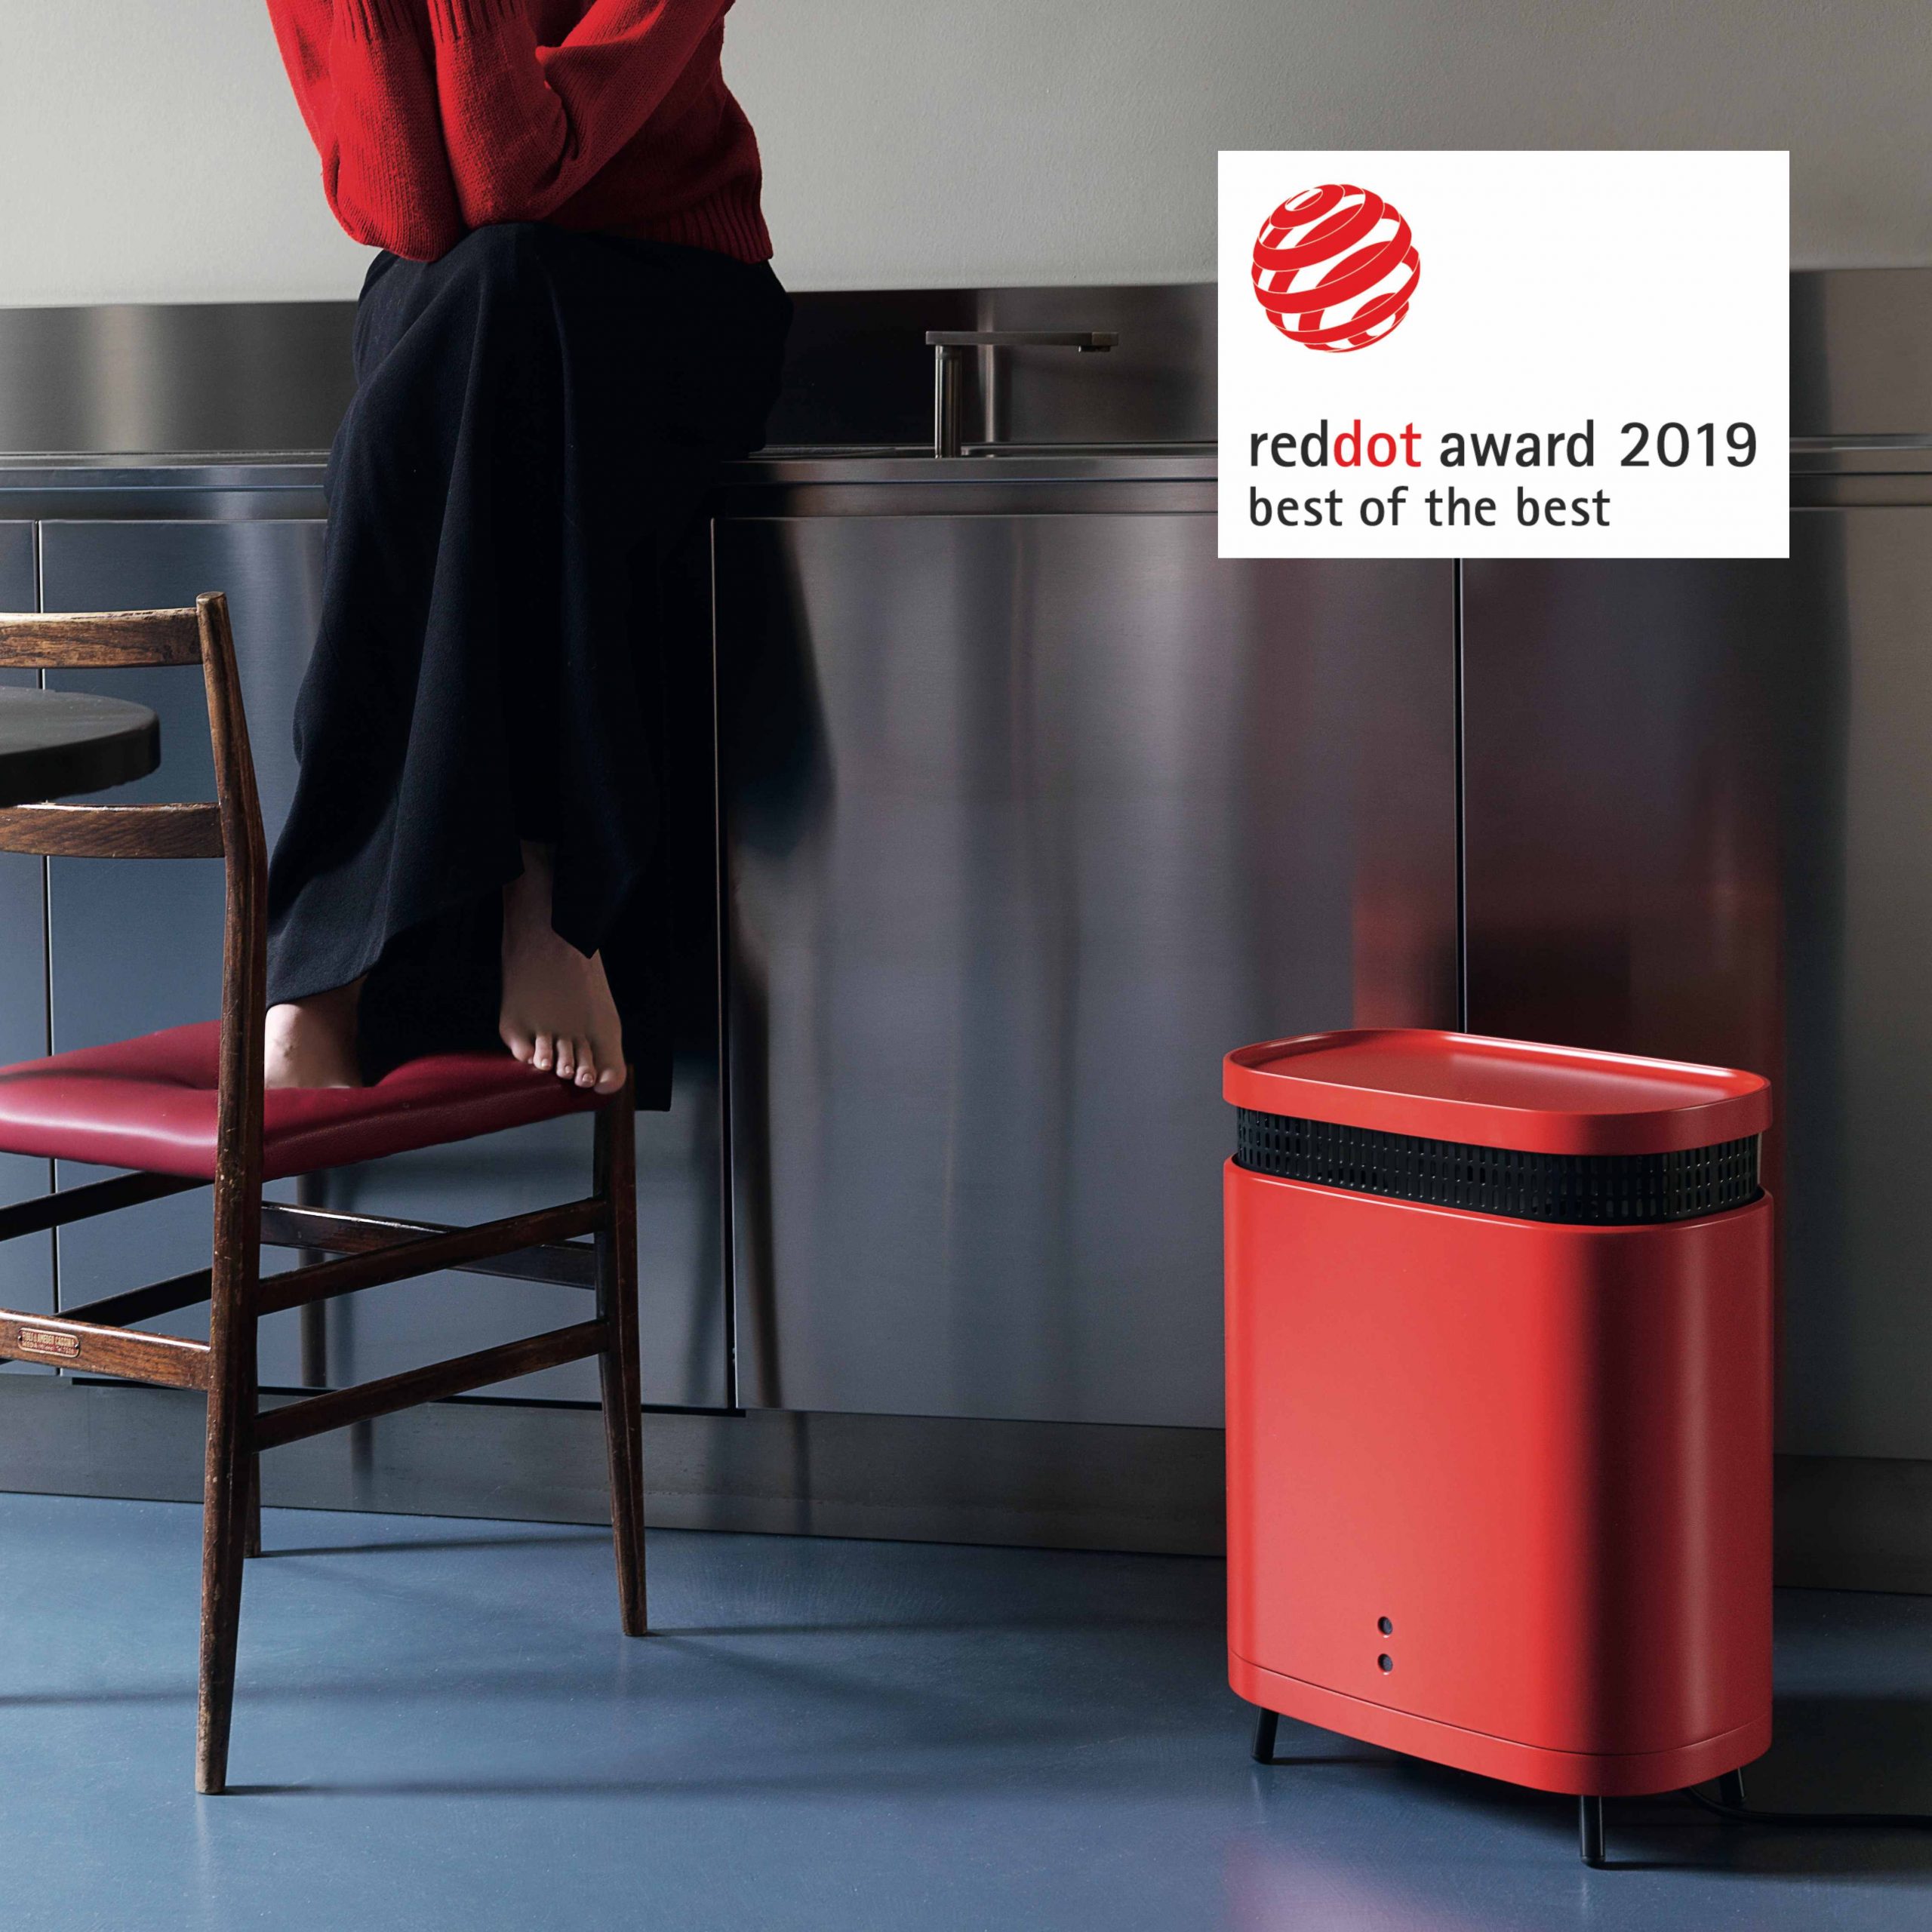 Astro wins the Red Dot Design Award 2019 Best Of The Best